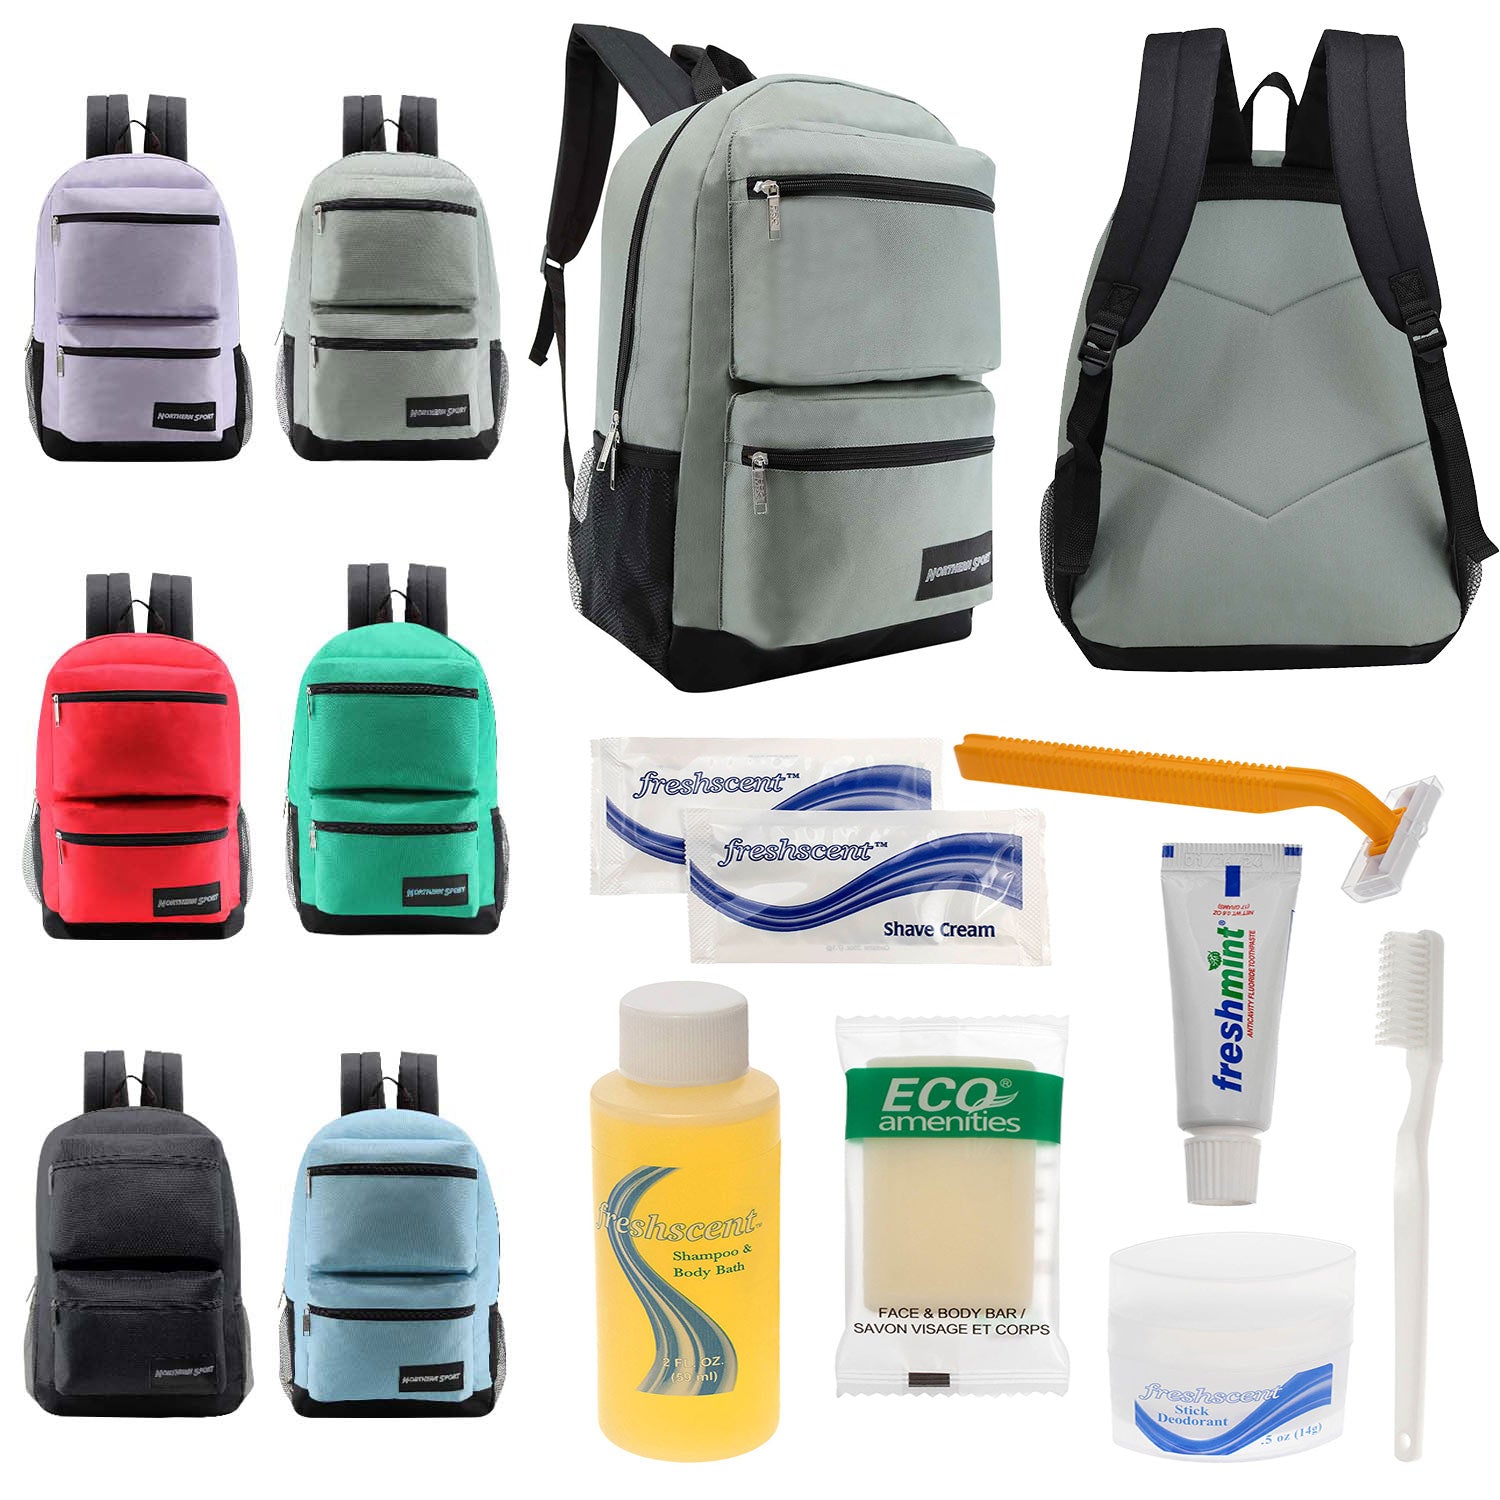 Bulk Case of 12 19" Backpacks and 12 Hygiene & Toiletries Kit - Wholesale Care Package - Disaster Relief Kit, Homeless, Charity